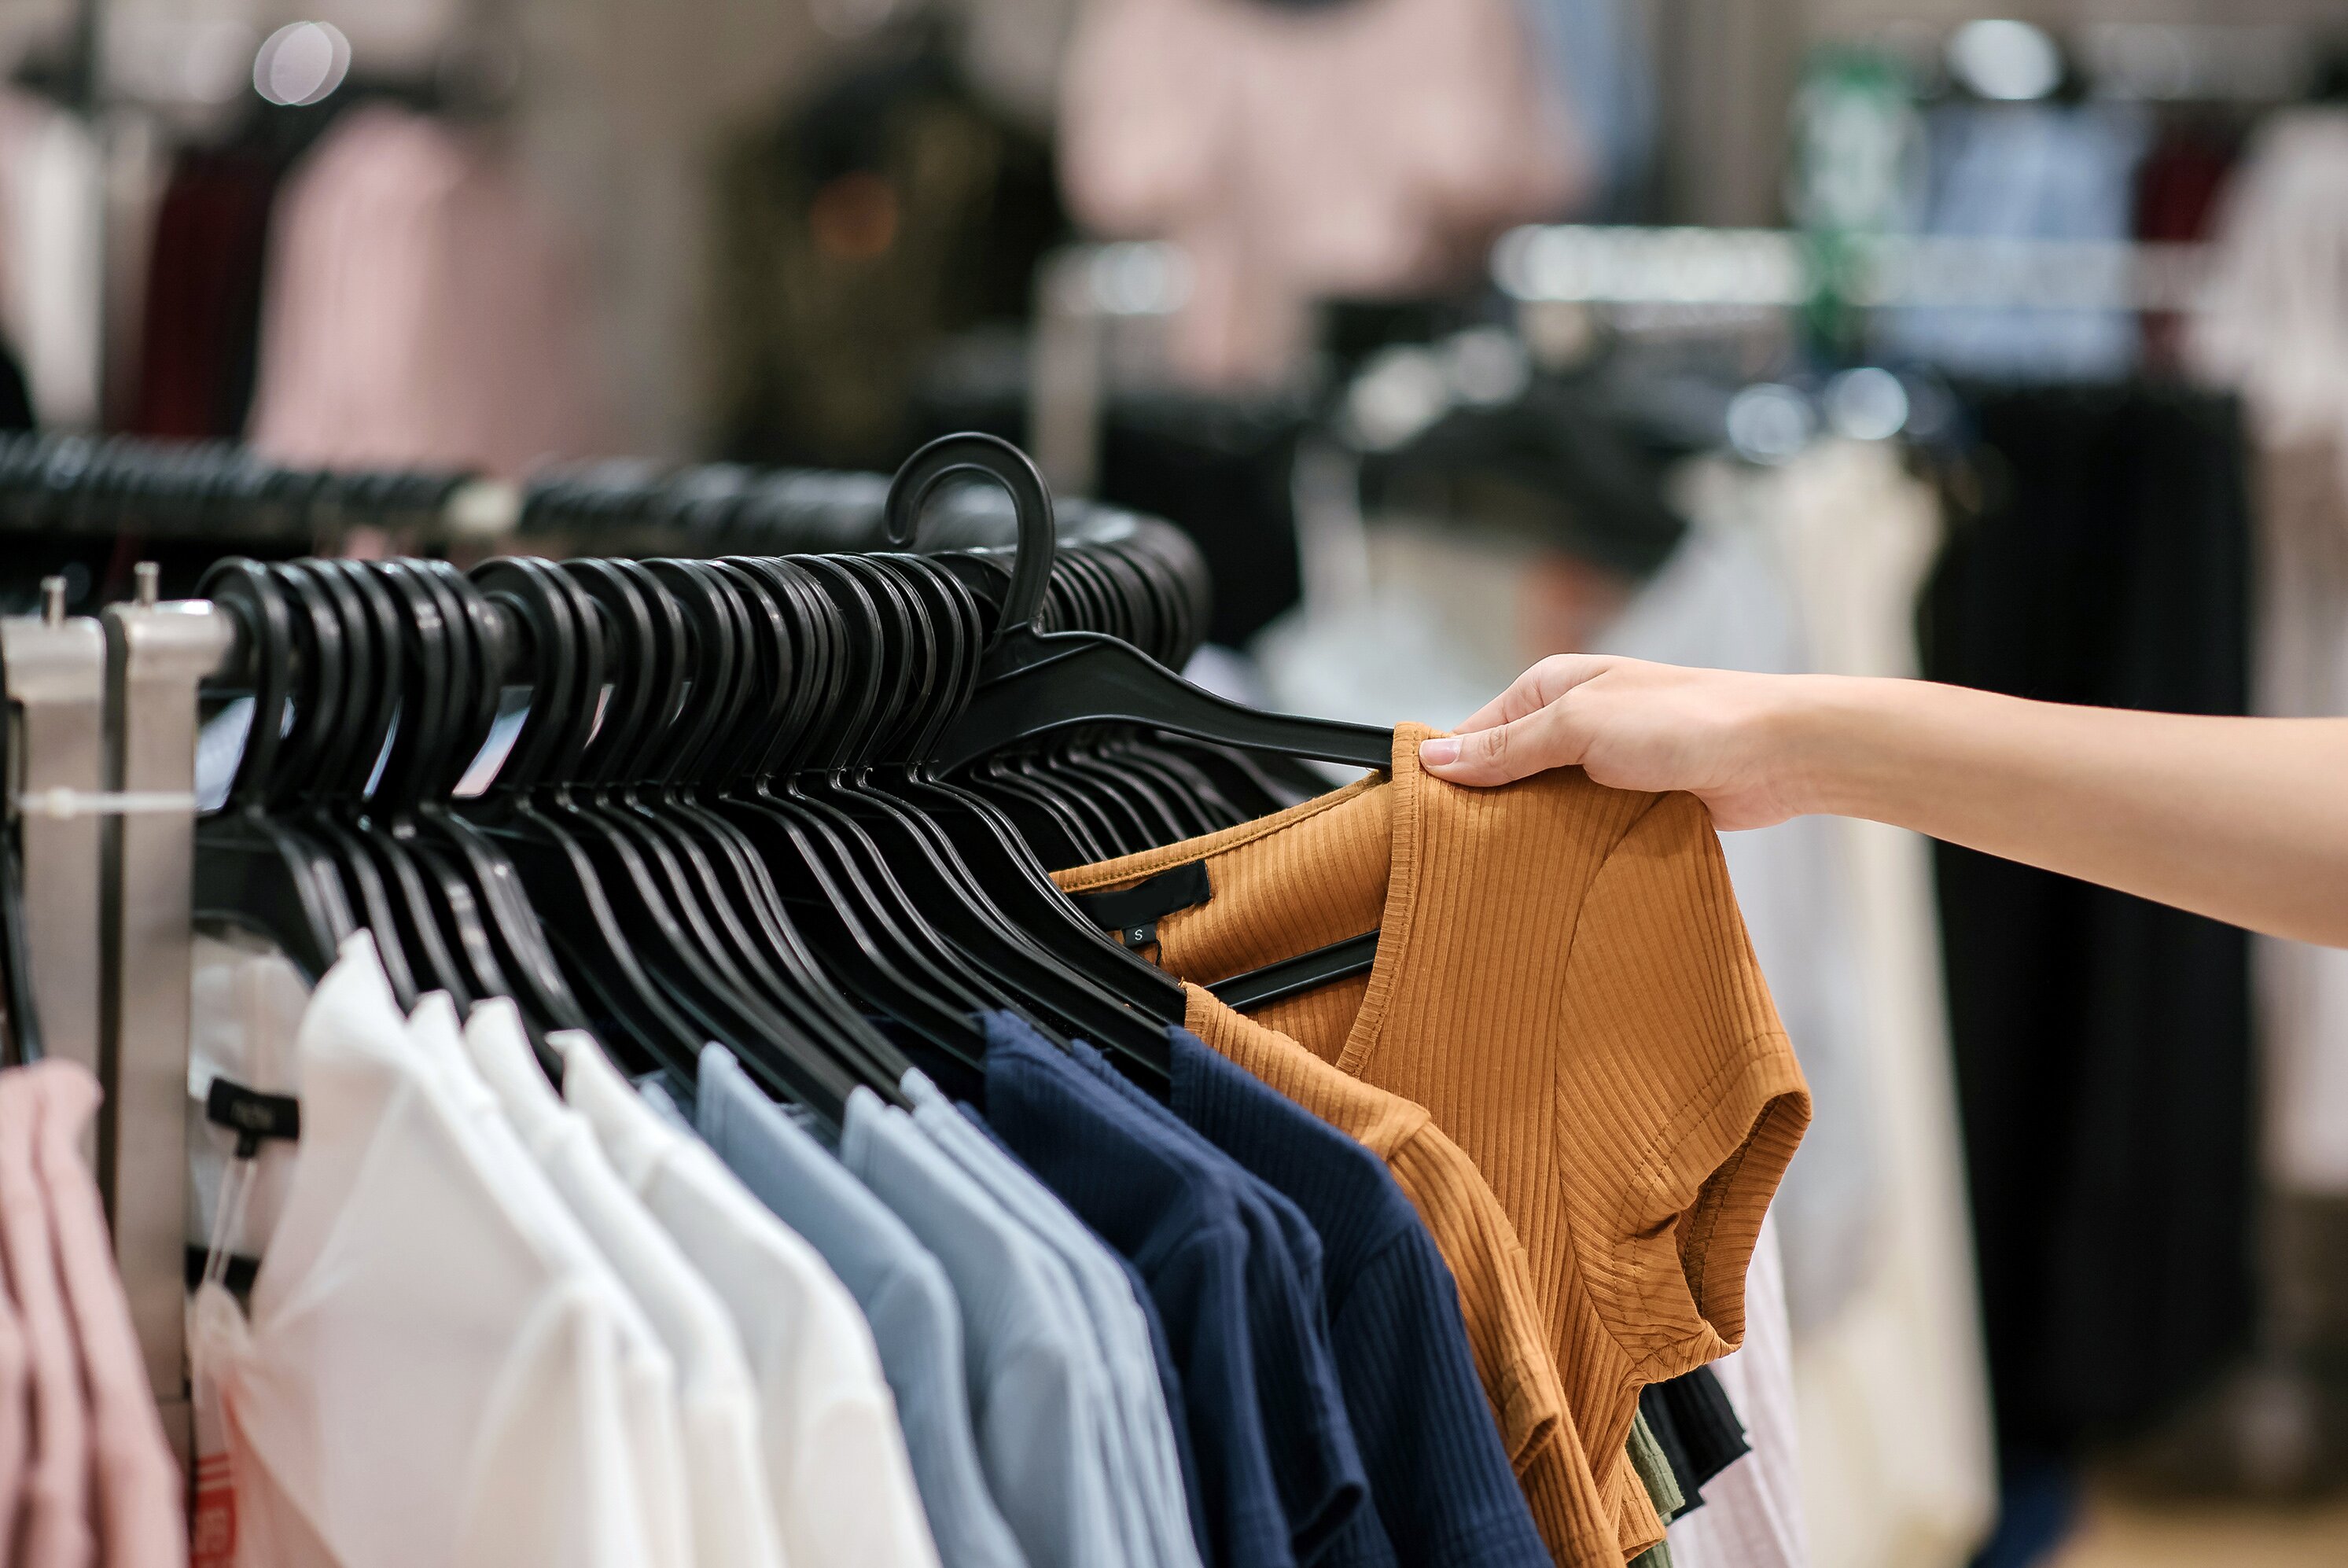 Fashion & Clothing Retailers in Europe